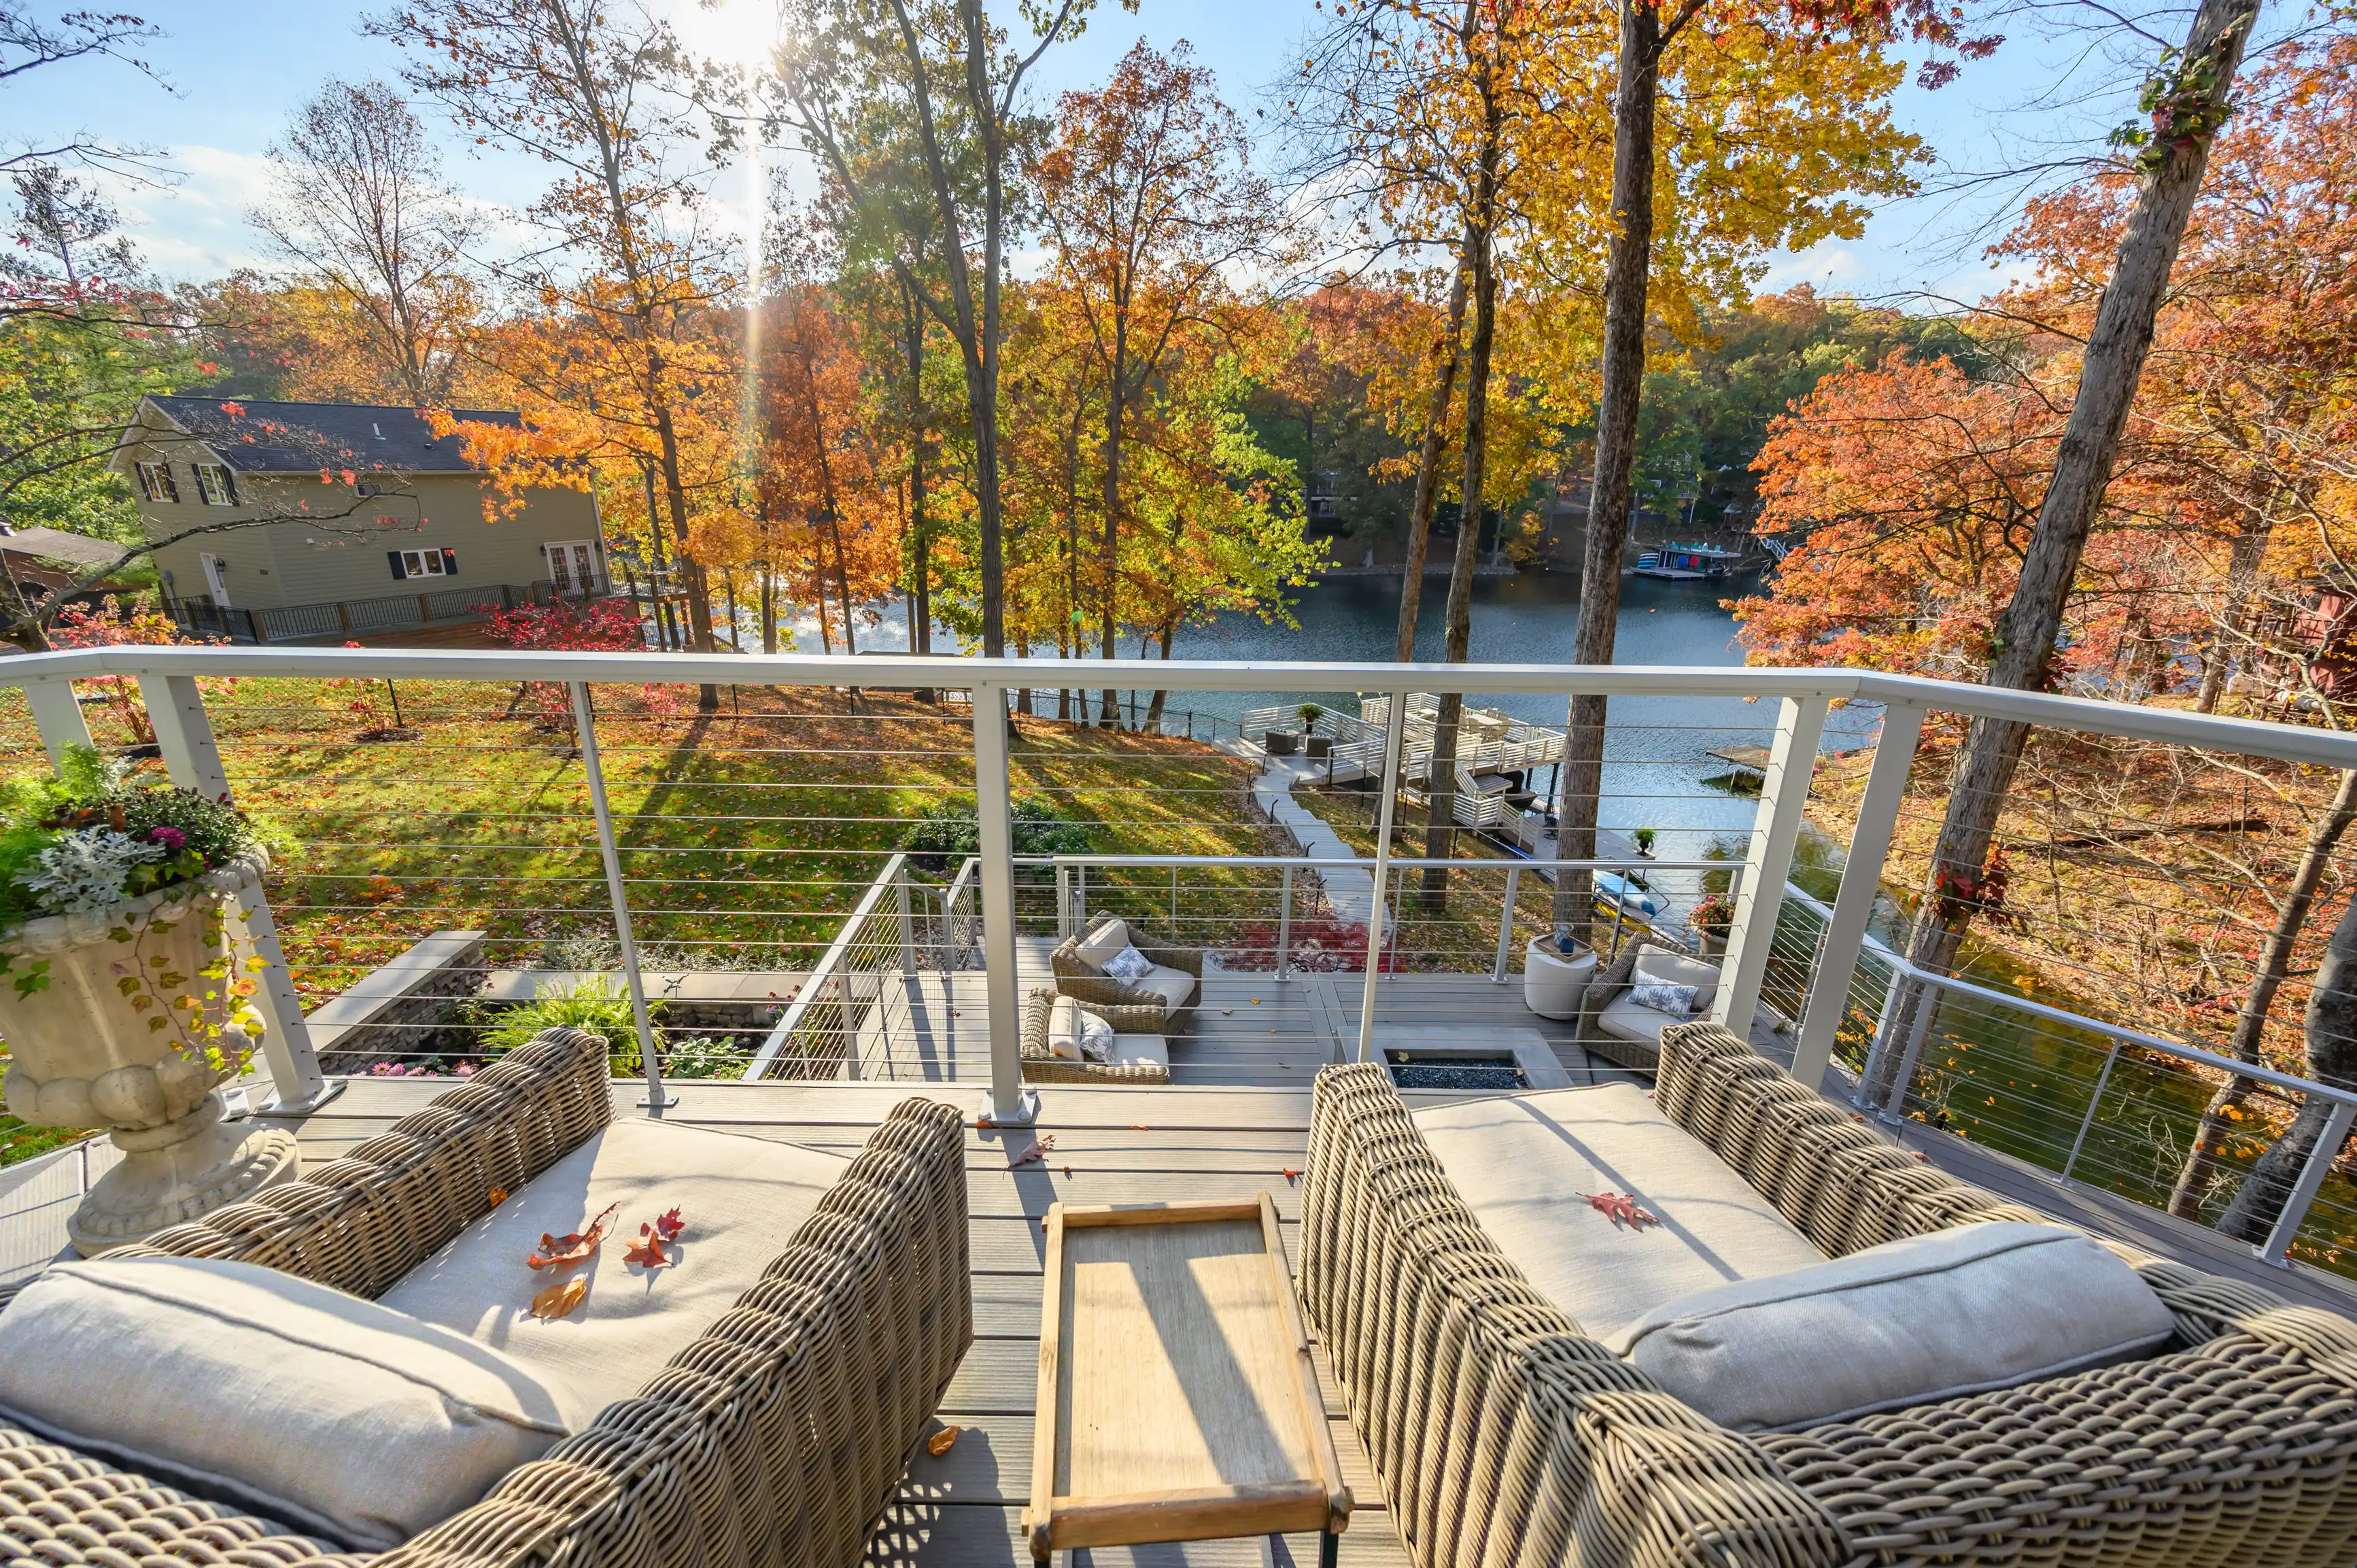 View from a balcony with outdoor furniture overlooking a beautiful autumnal lakeside scene with colorful trees and a clear sky.